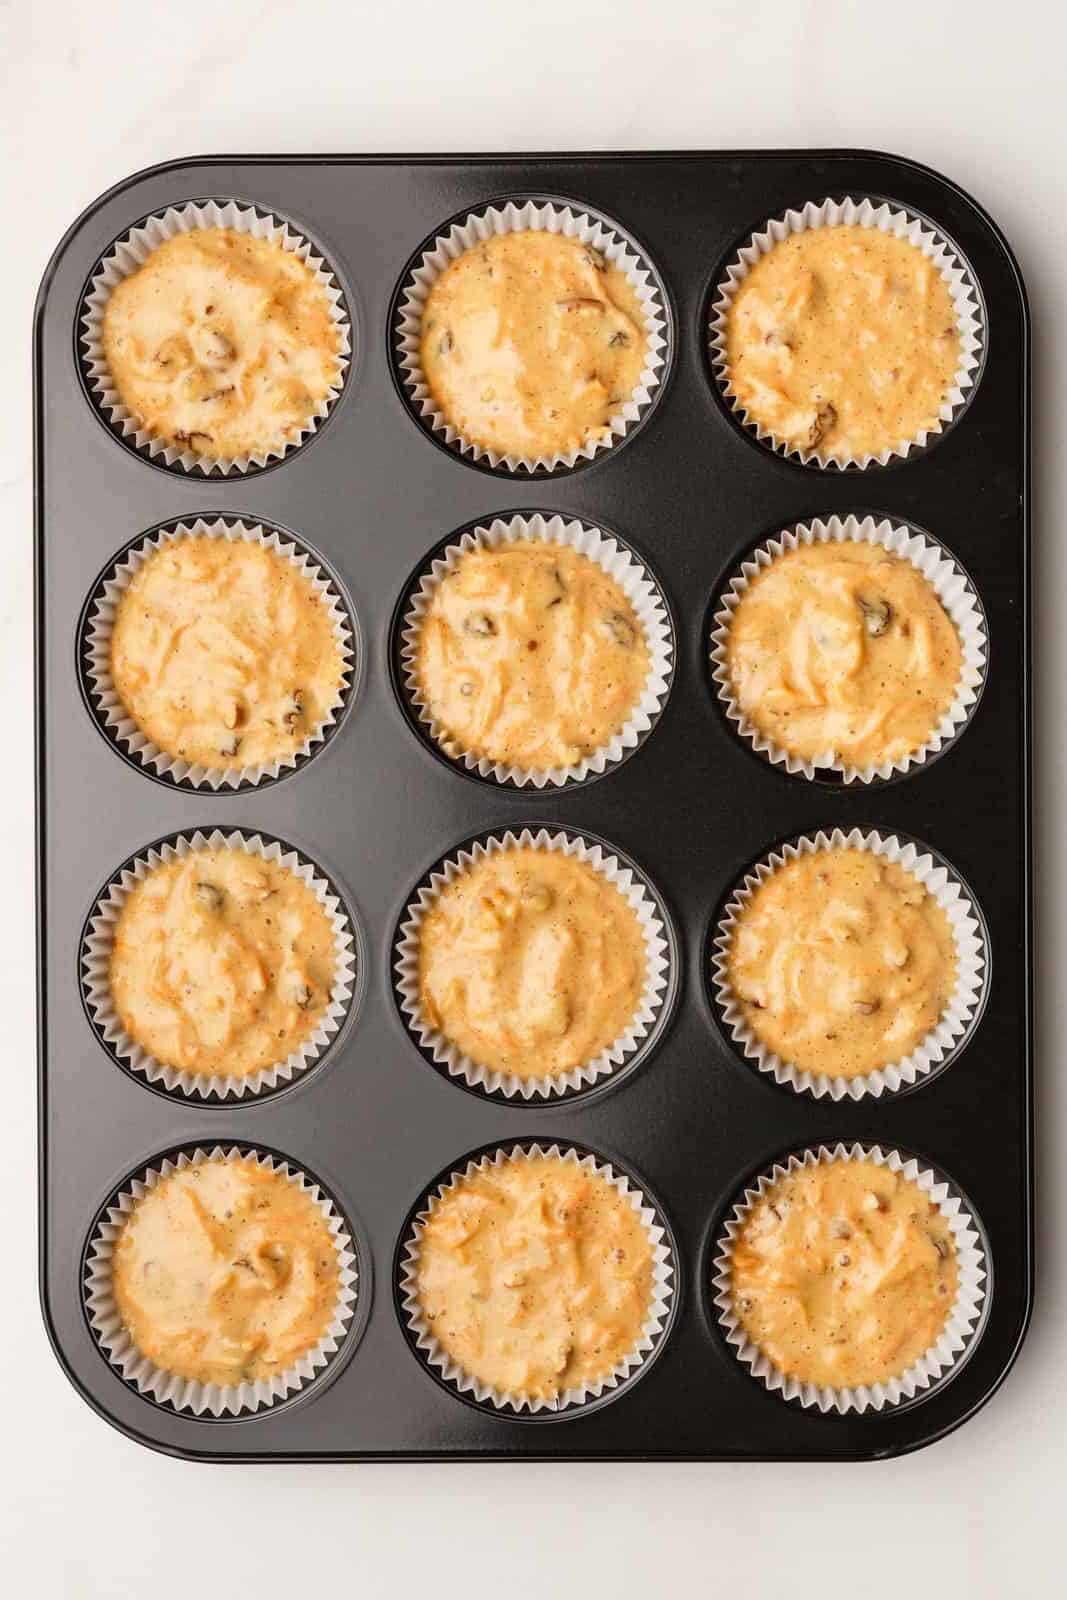 top down image of 12 morning glory muffin batter prepared in a muffin tin. 